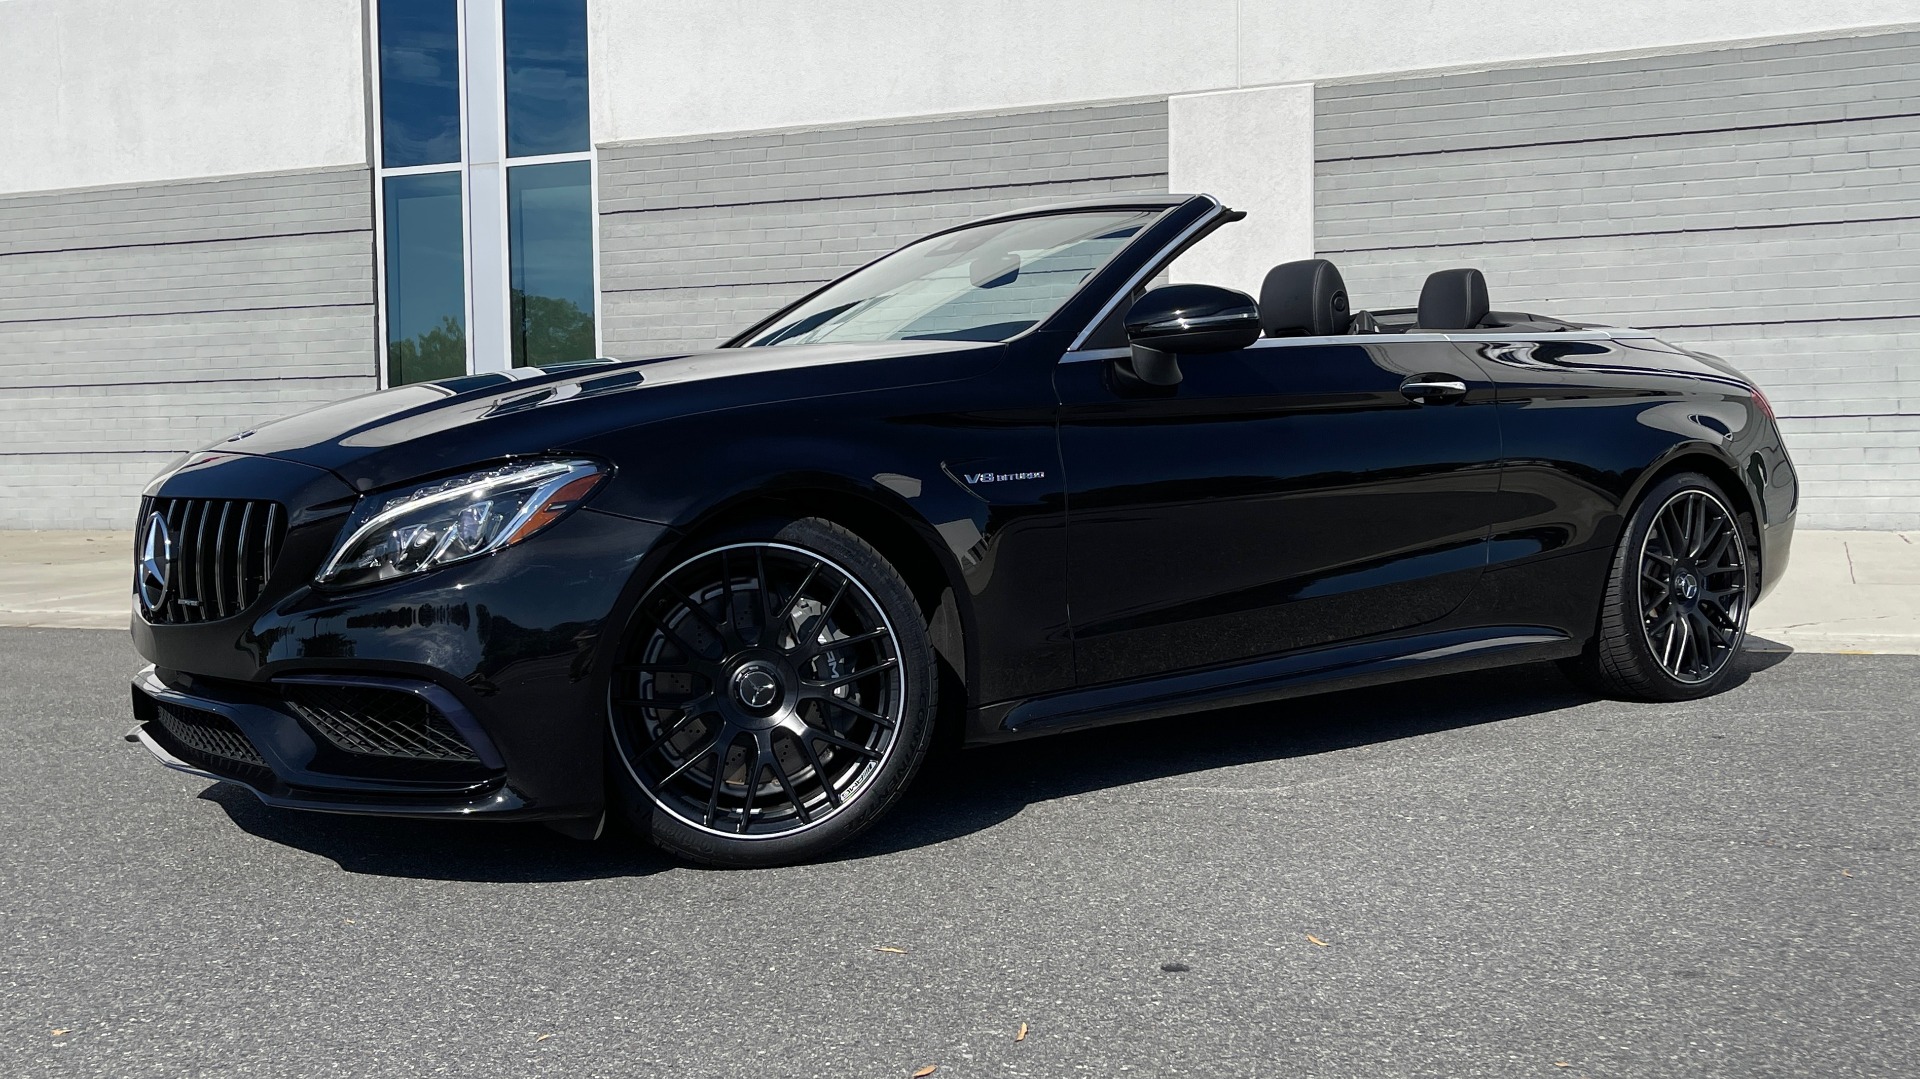 Used 2018 Mercedes-Benz C-CLASS AMG C 63 CAB / PREMIUM / LIGHTING / NIGHT PKG / PERF EXHAUST for sale $67,495 at Formula Imports in Charlotte NC 28227 2